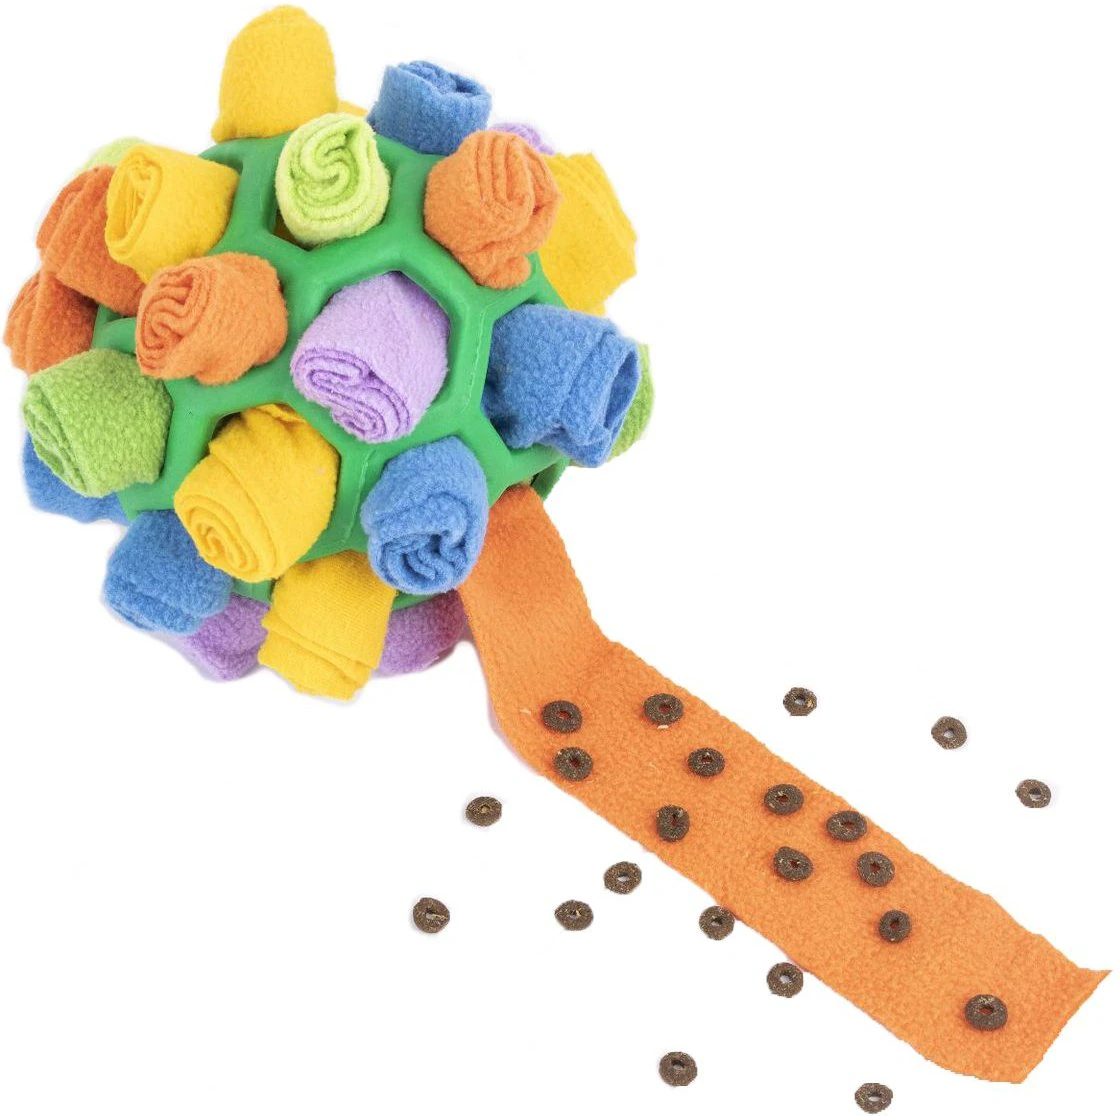 L'chic Snack Ball Puzzle Pet Toy, Educational Puzzle and Feeder - 20486661